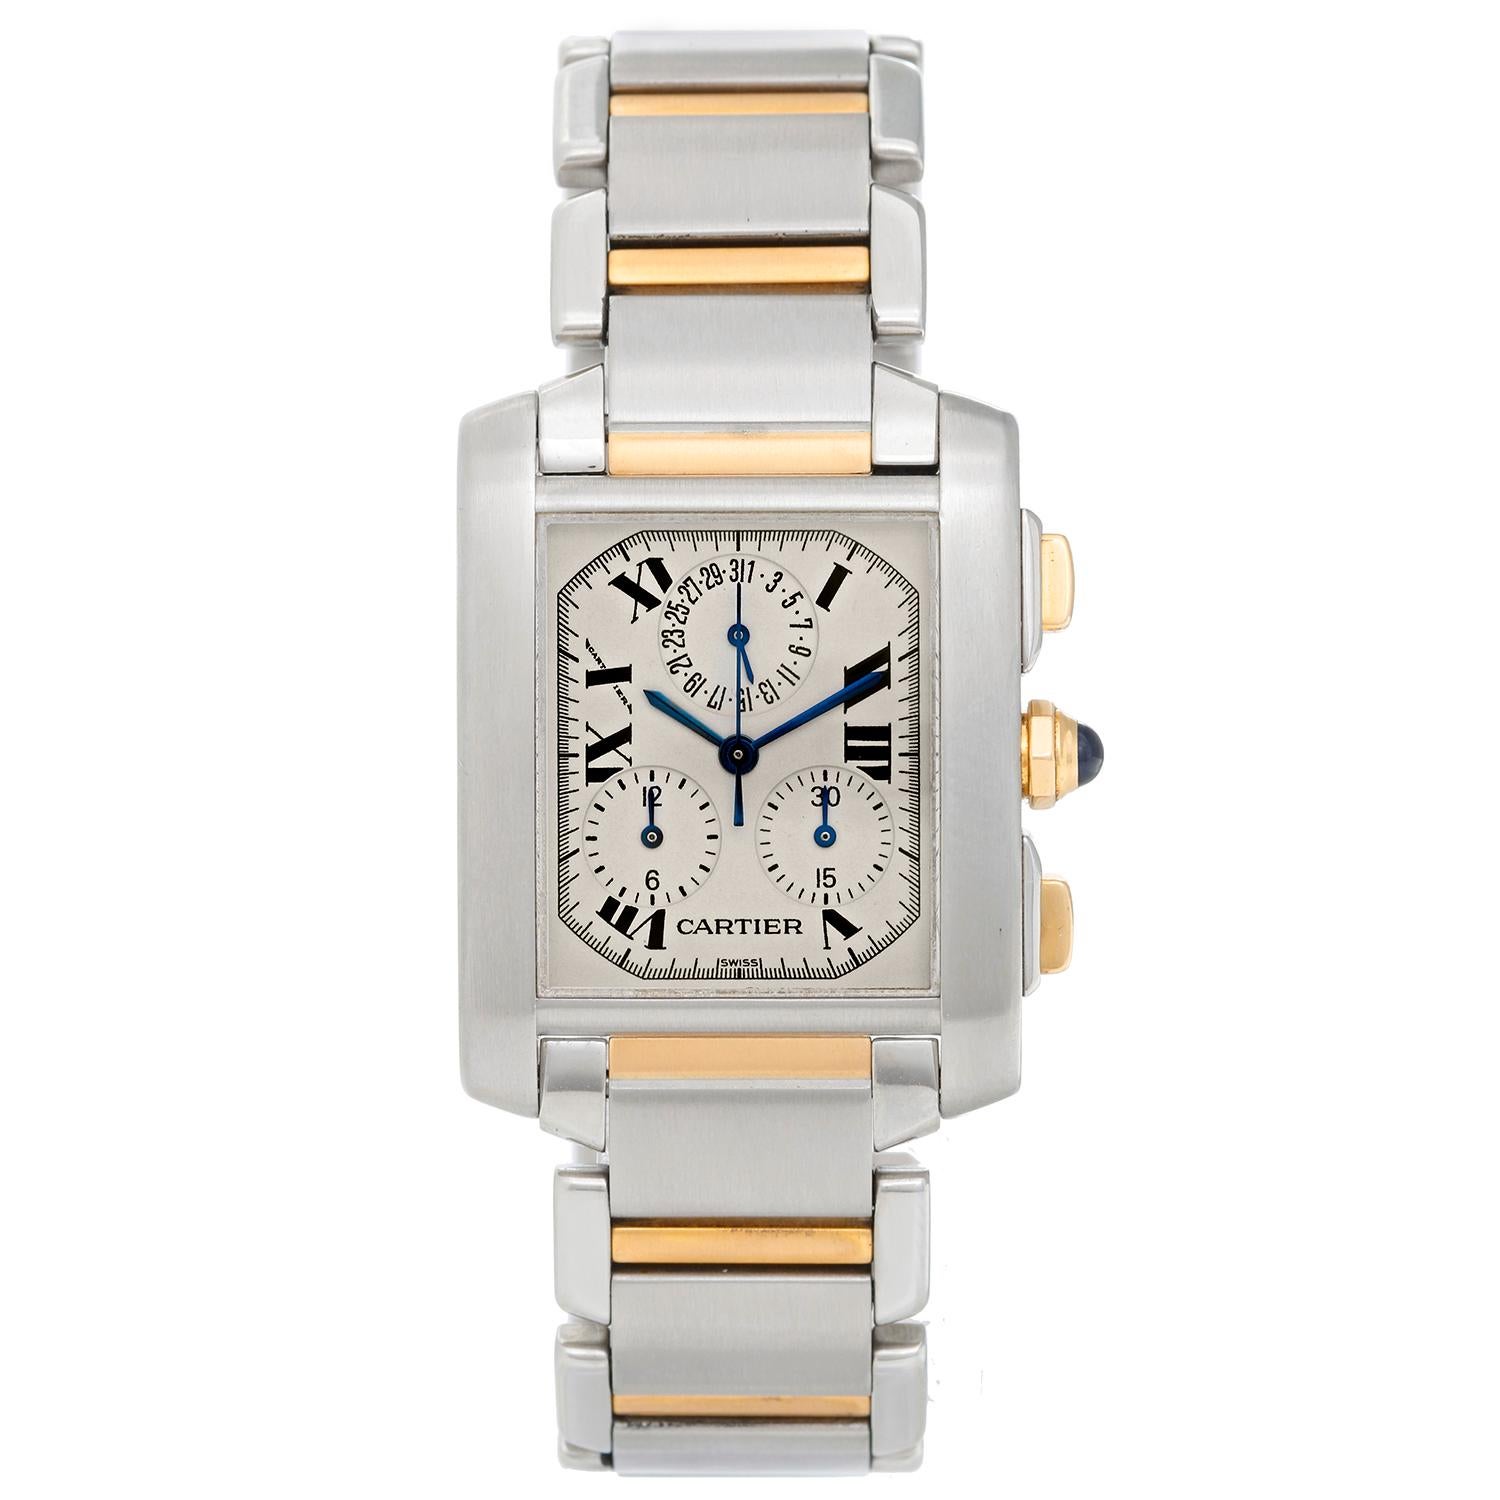 Cartier Tank Francaise Chronograph Steel & Gold Watch W51004Q4 -  Quartz. Stainless steel case; crown set with blue sapphire cabochon (28mm x 37mm). Ivory colored dial with black Roman numerals. Stainless steel & 18k gold Cartier bracelet. Pre-owned